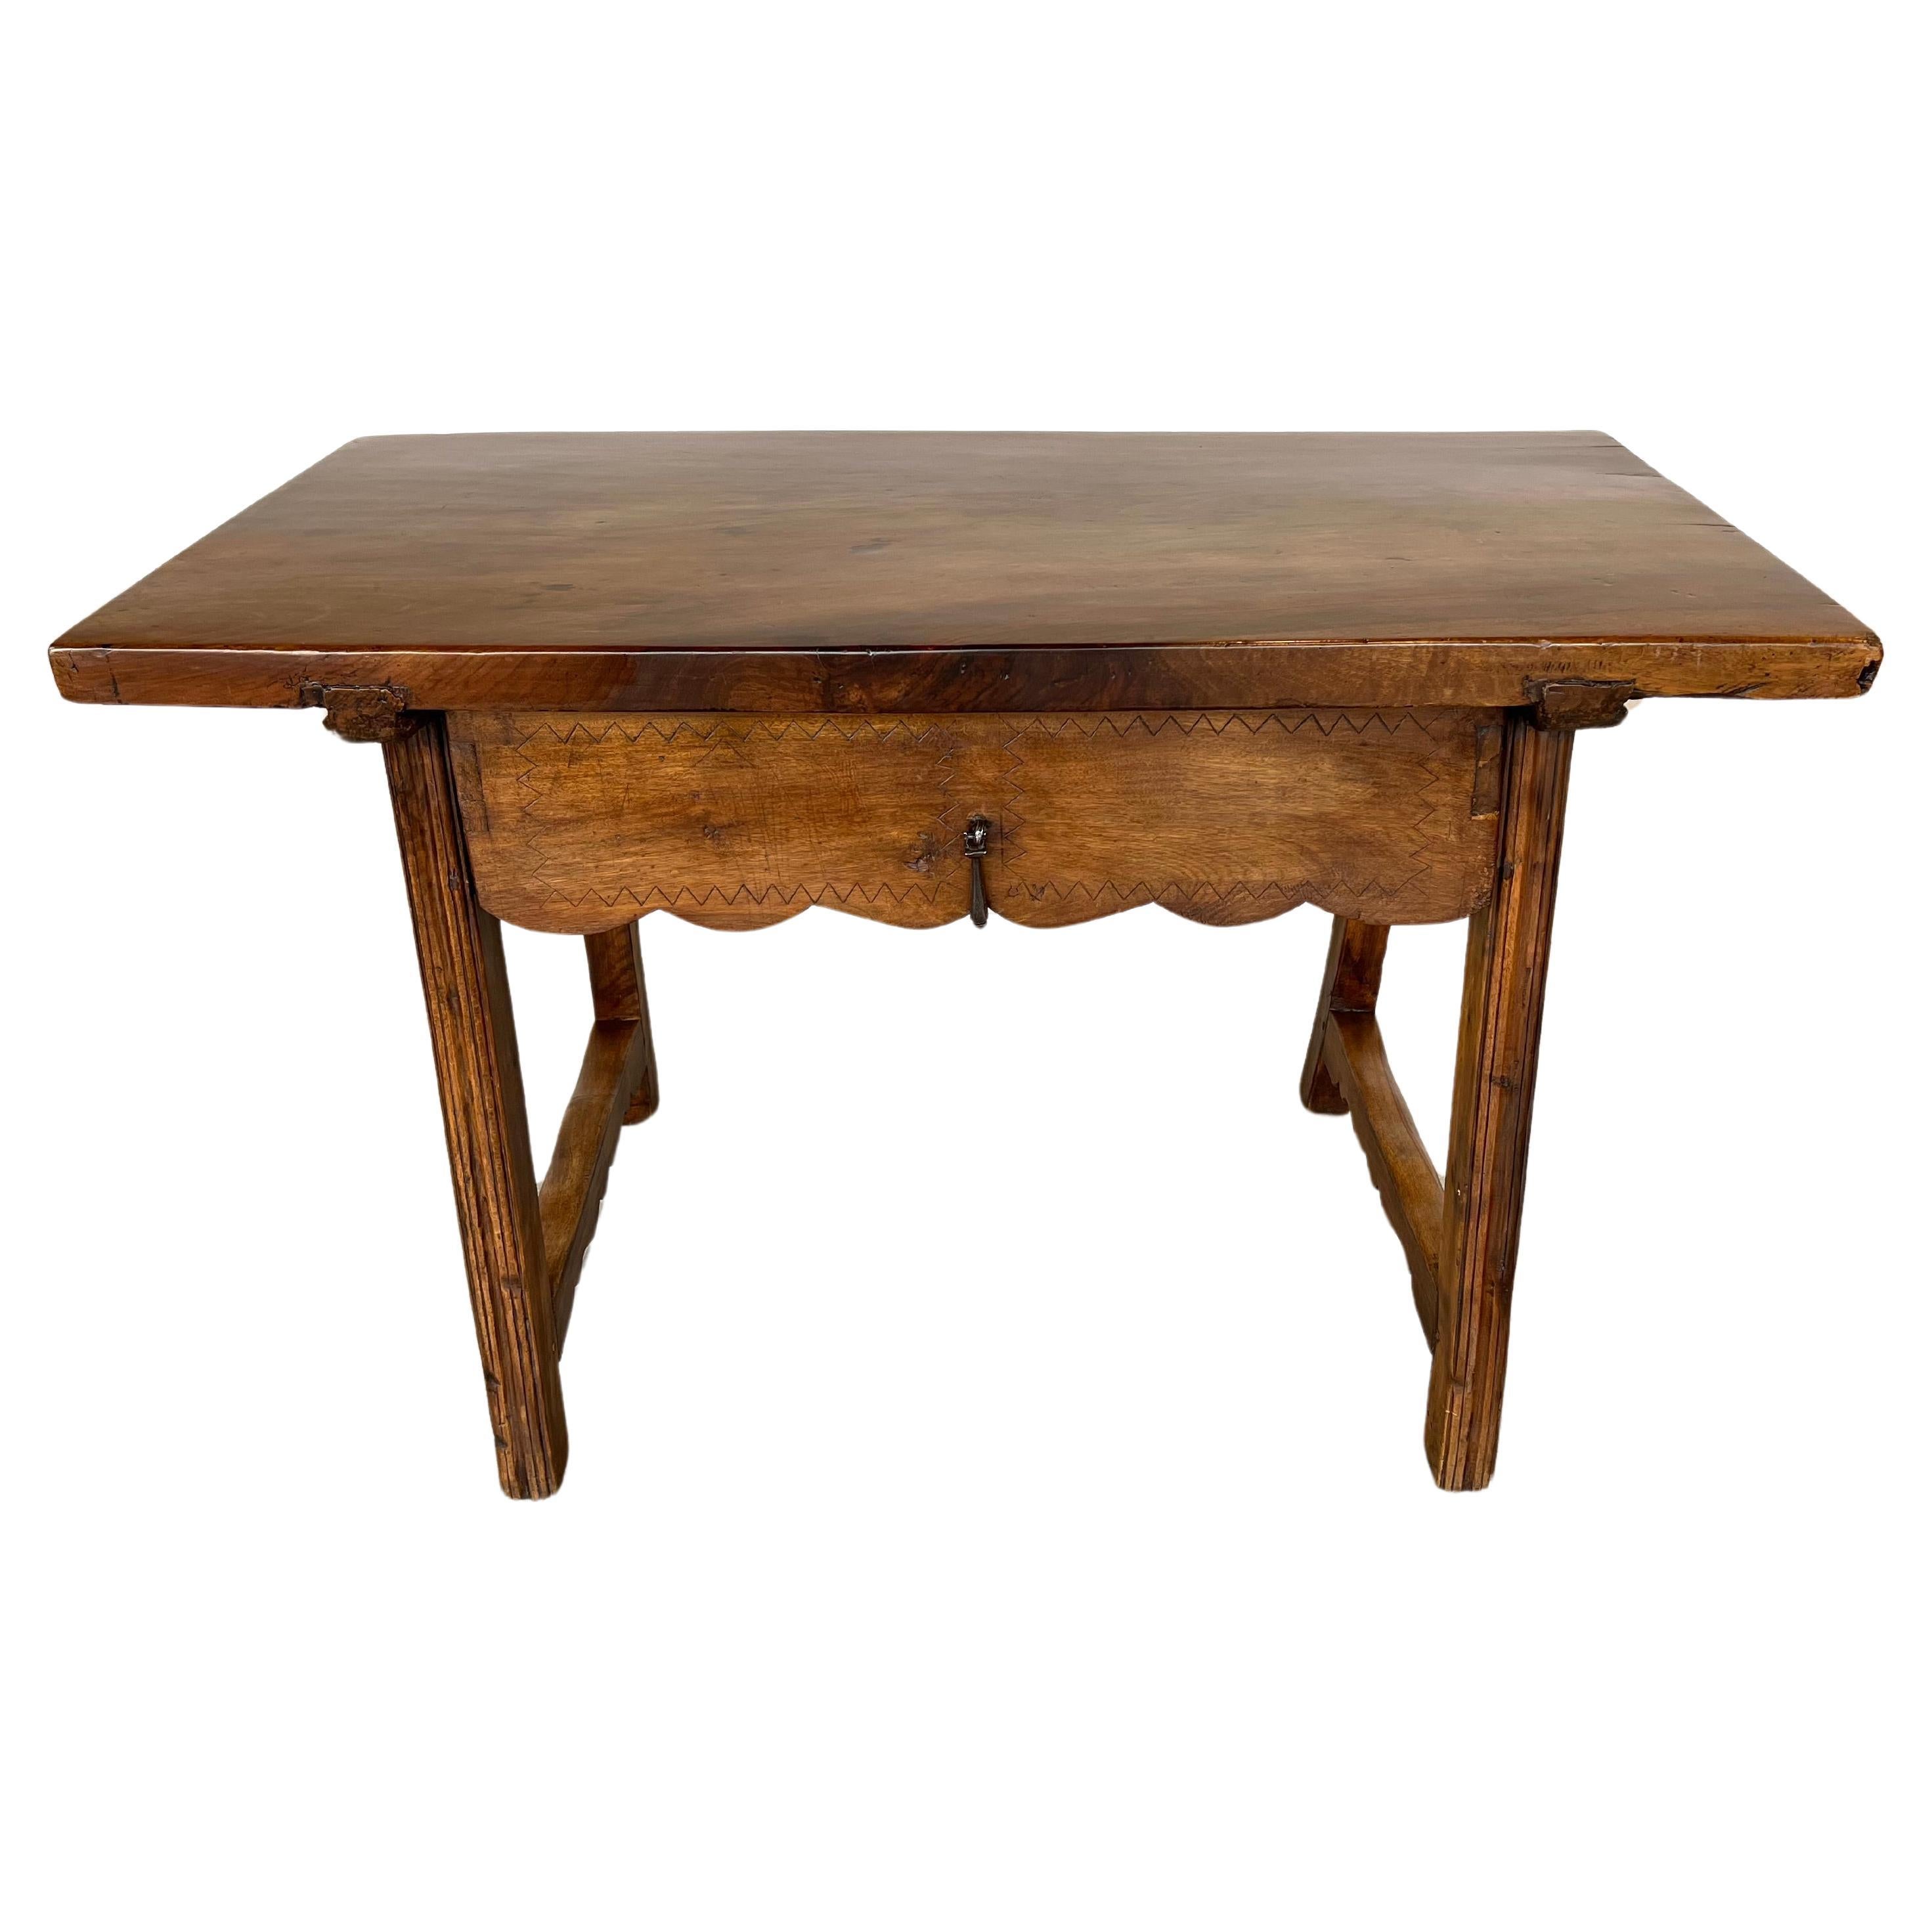 Spanish Antique Kitchen or Side Walnut Table 19c